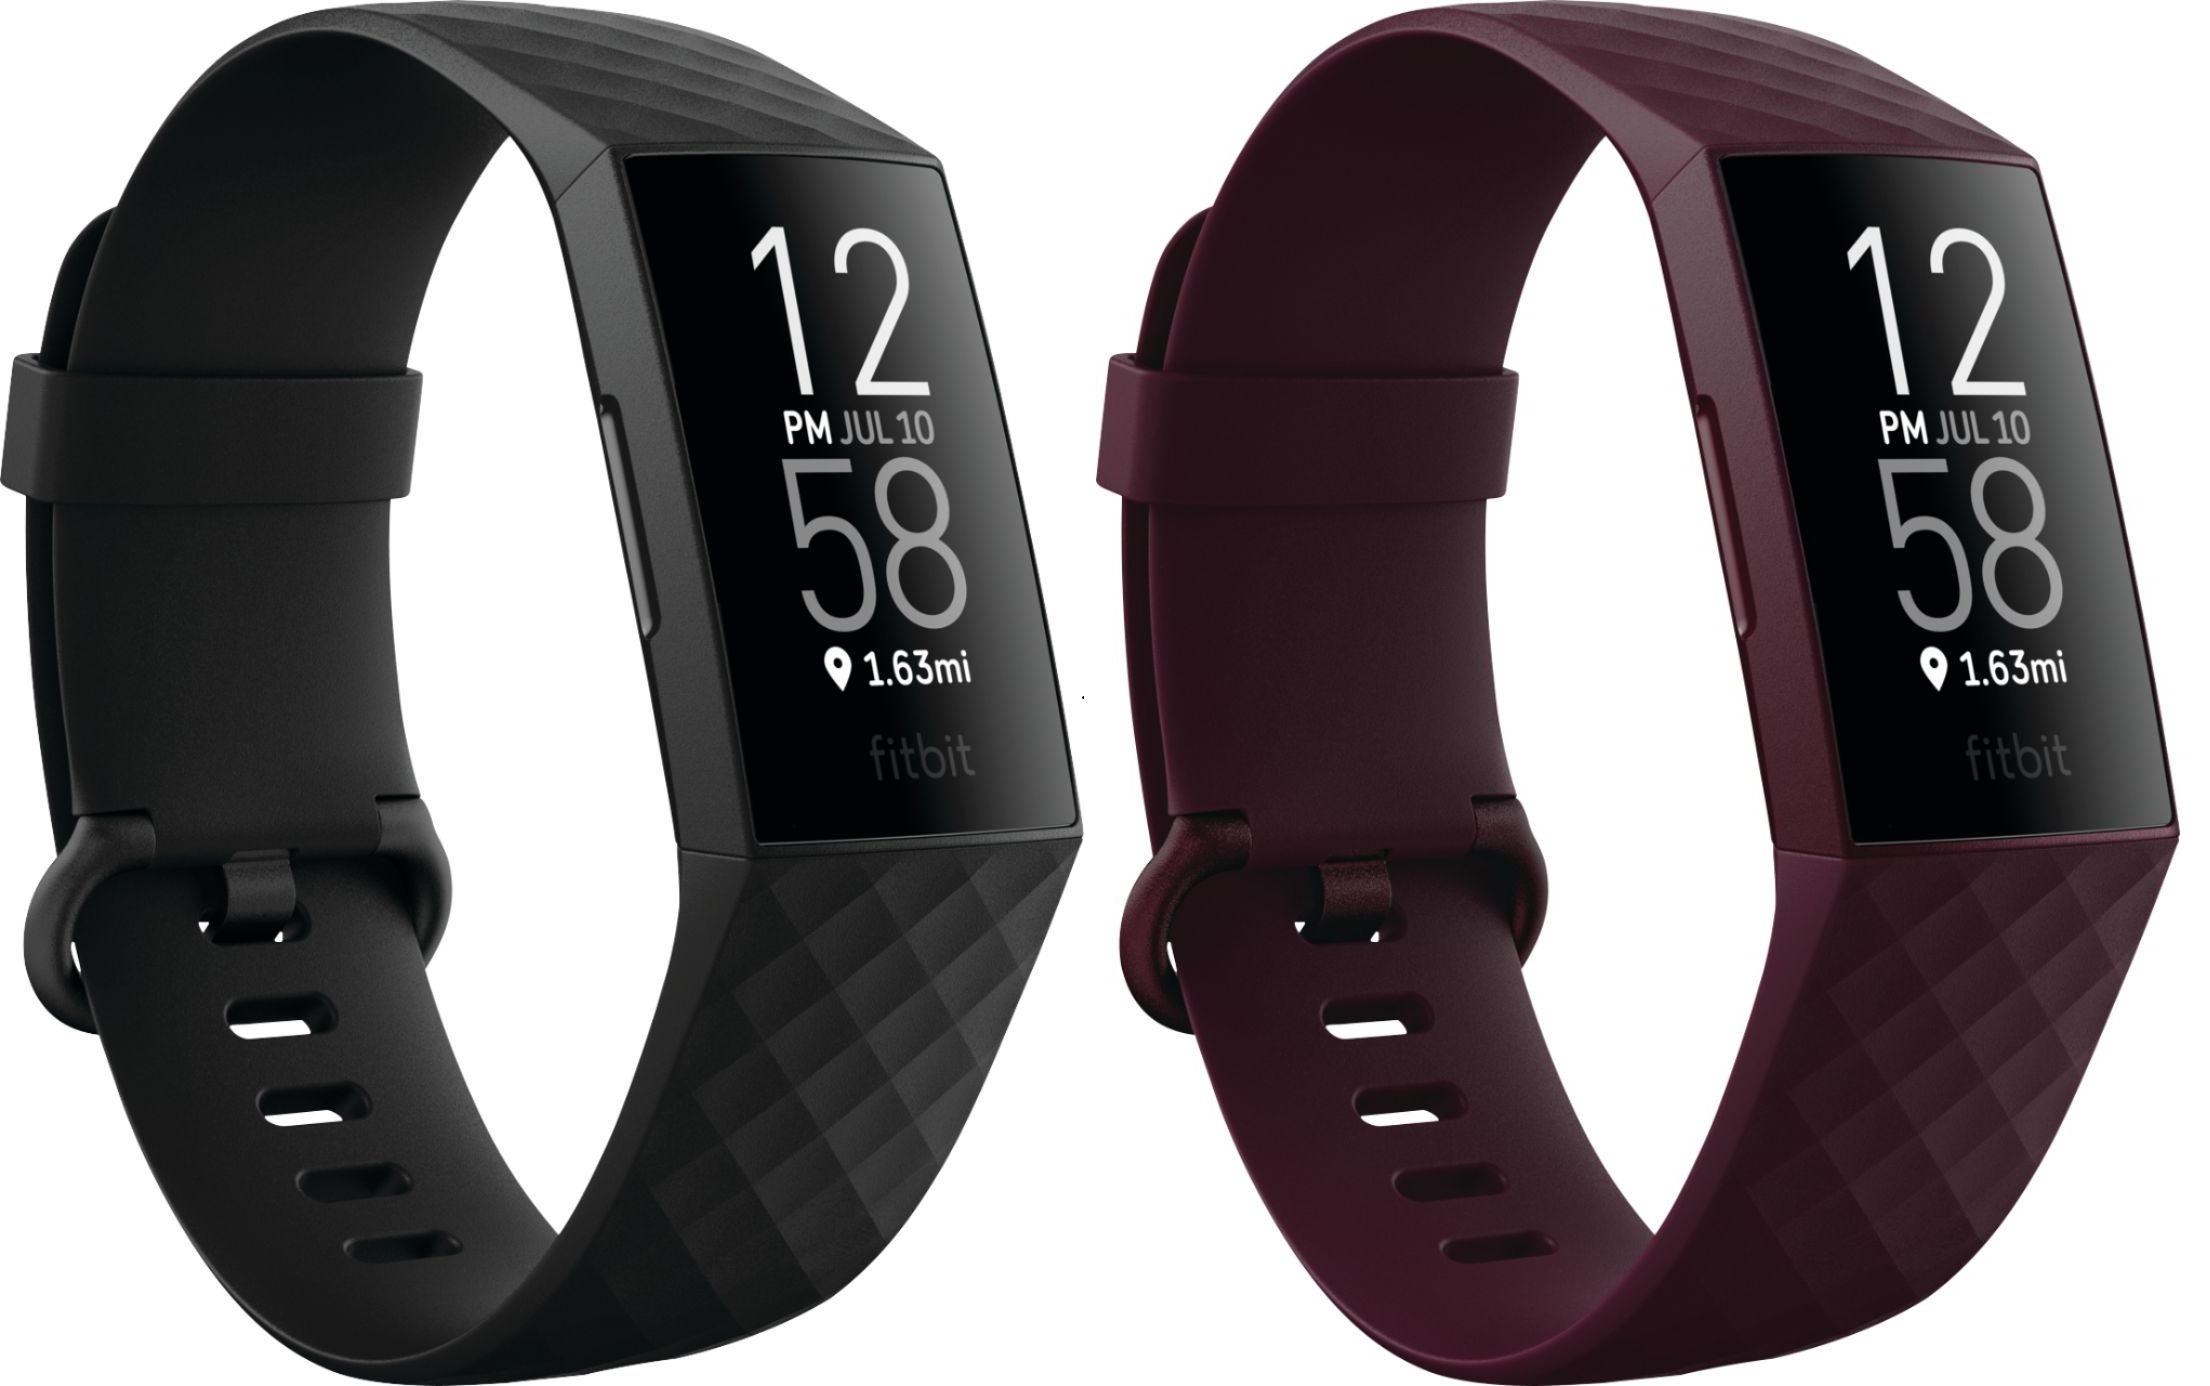 First Fitbit Charge 4 fitness tracker images leak - NotebookCheck.net News